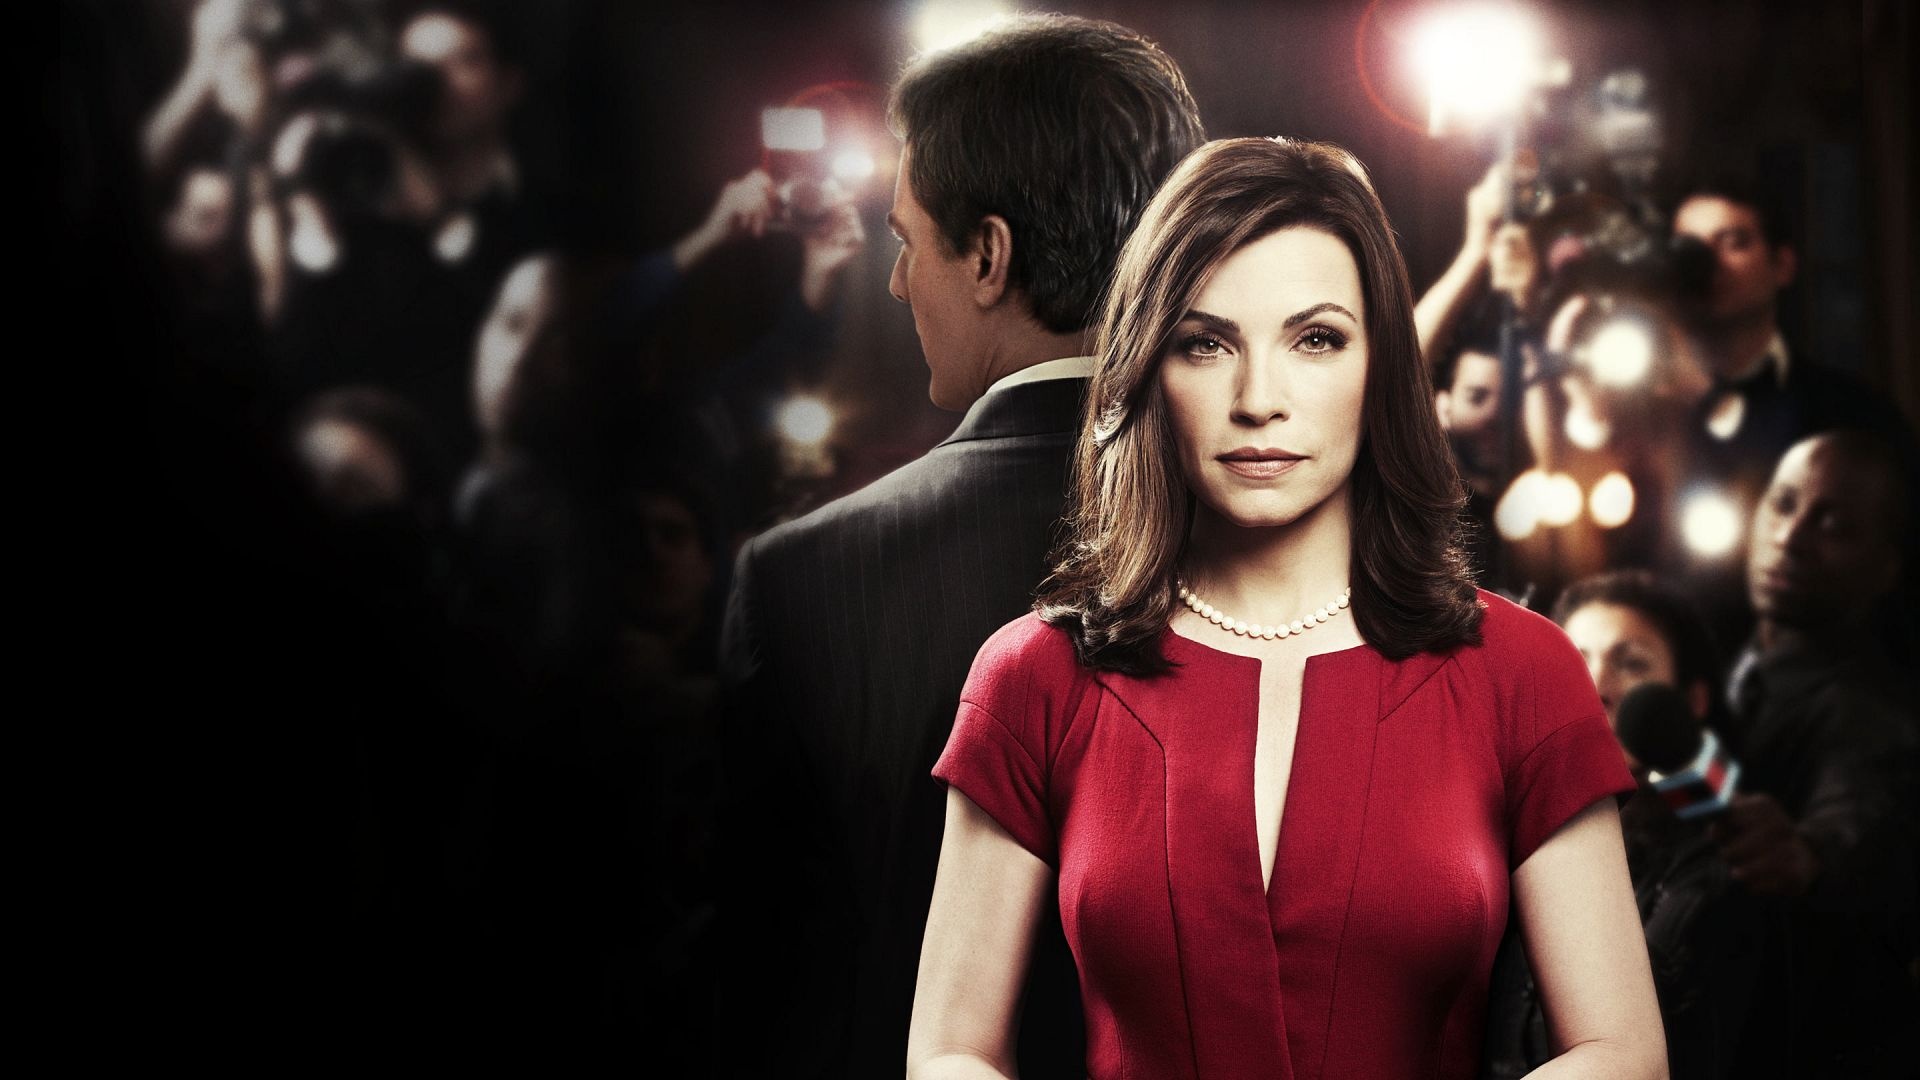 The Good Wife (TV Series): Alicia Florrick, The wife of the Cook County State's Attorney, Returning to her career. 1920x1080 Full HD Wallpaper.